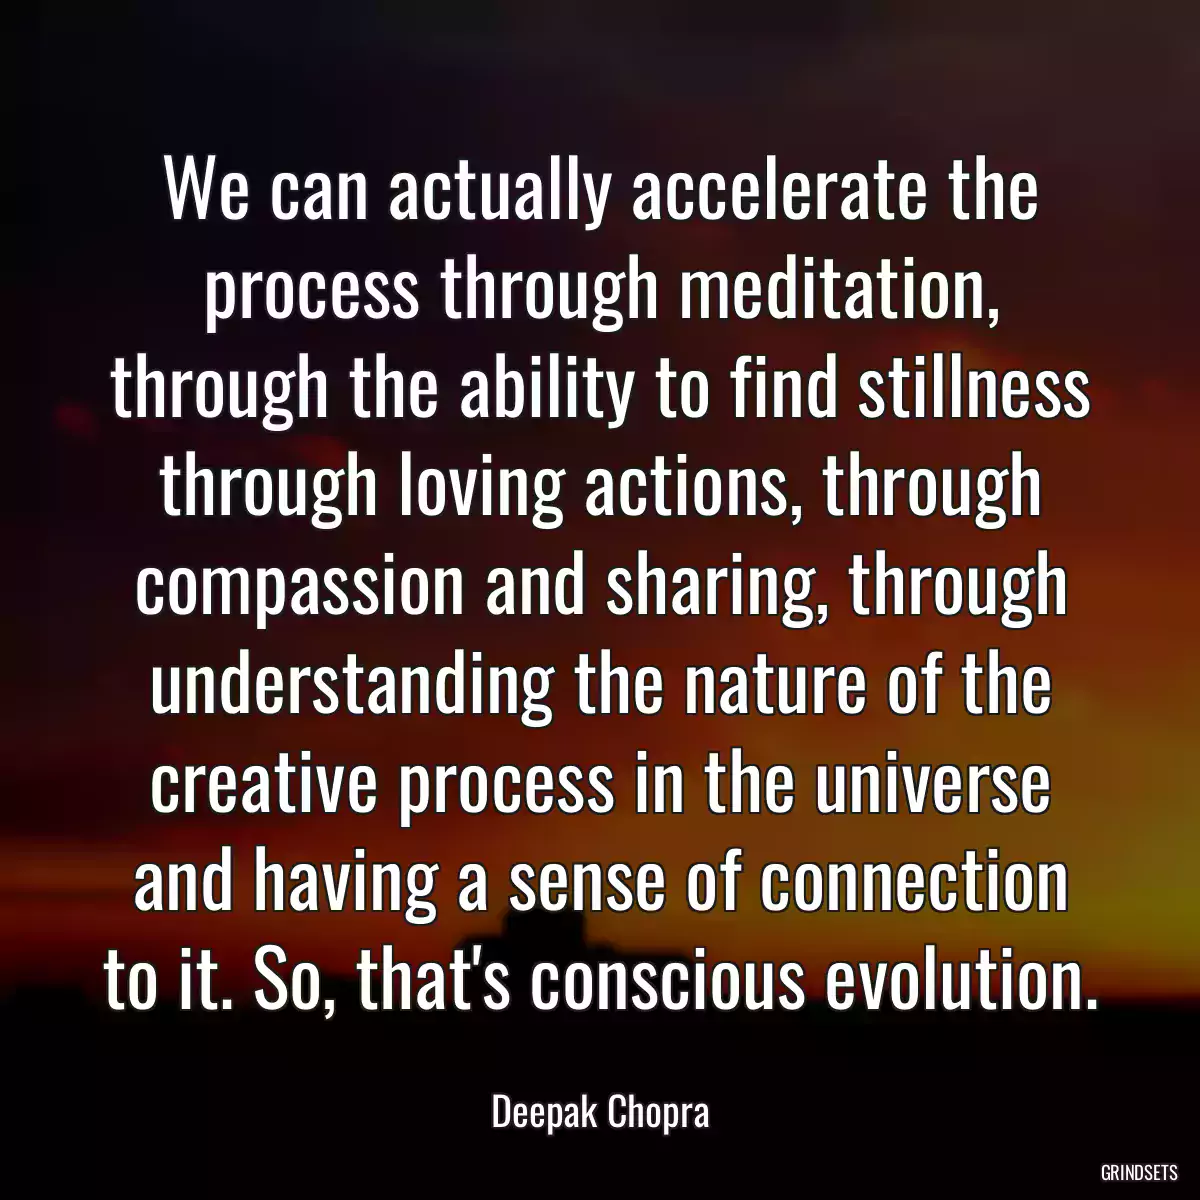 We can actually accelerate the process through meditation, through the ability to find stillness through loving actions, through compassion and sharing, through understanding the nature of the creative process in the universe and having a sense of connection to it. So, that\'s conscious evolution.